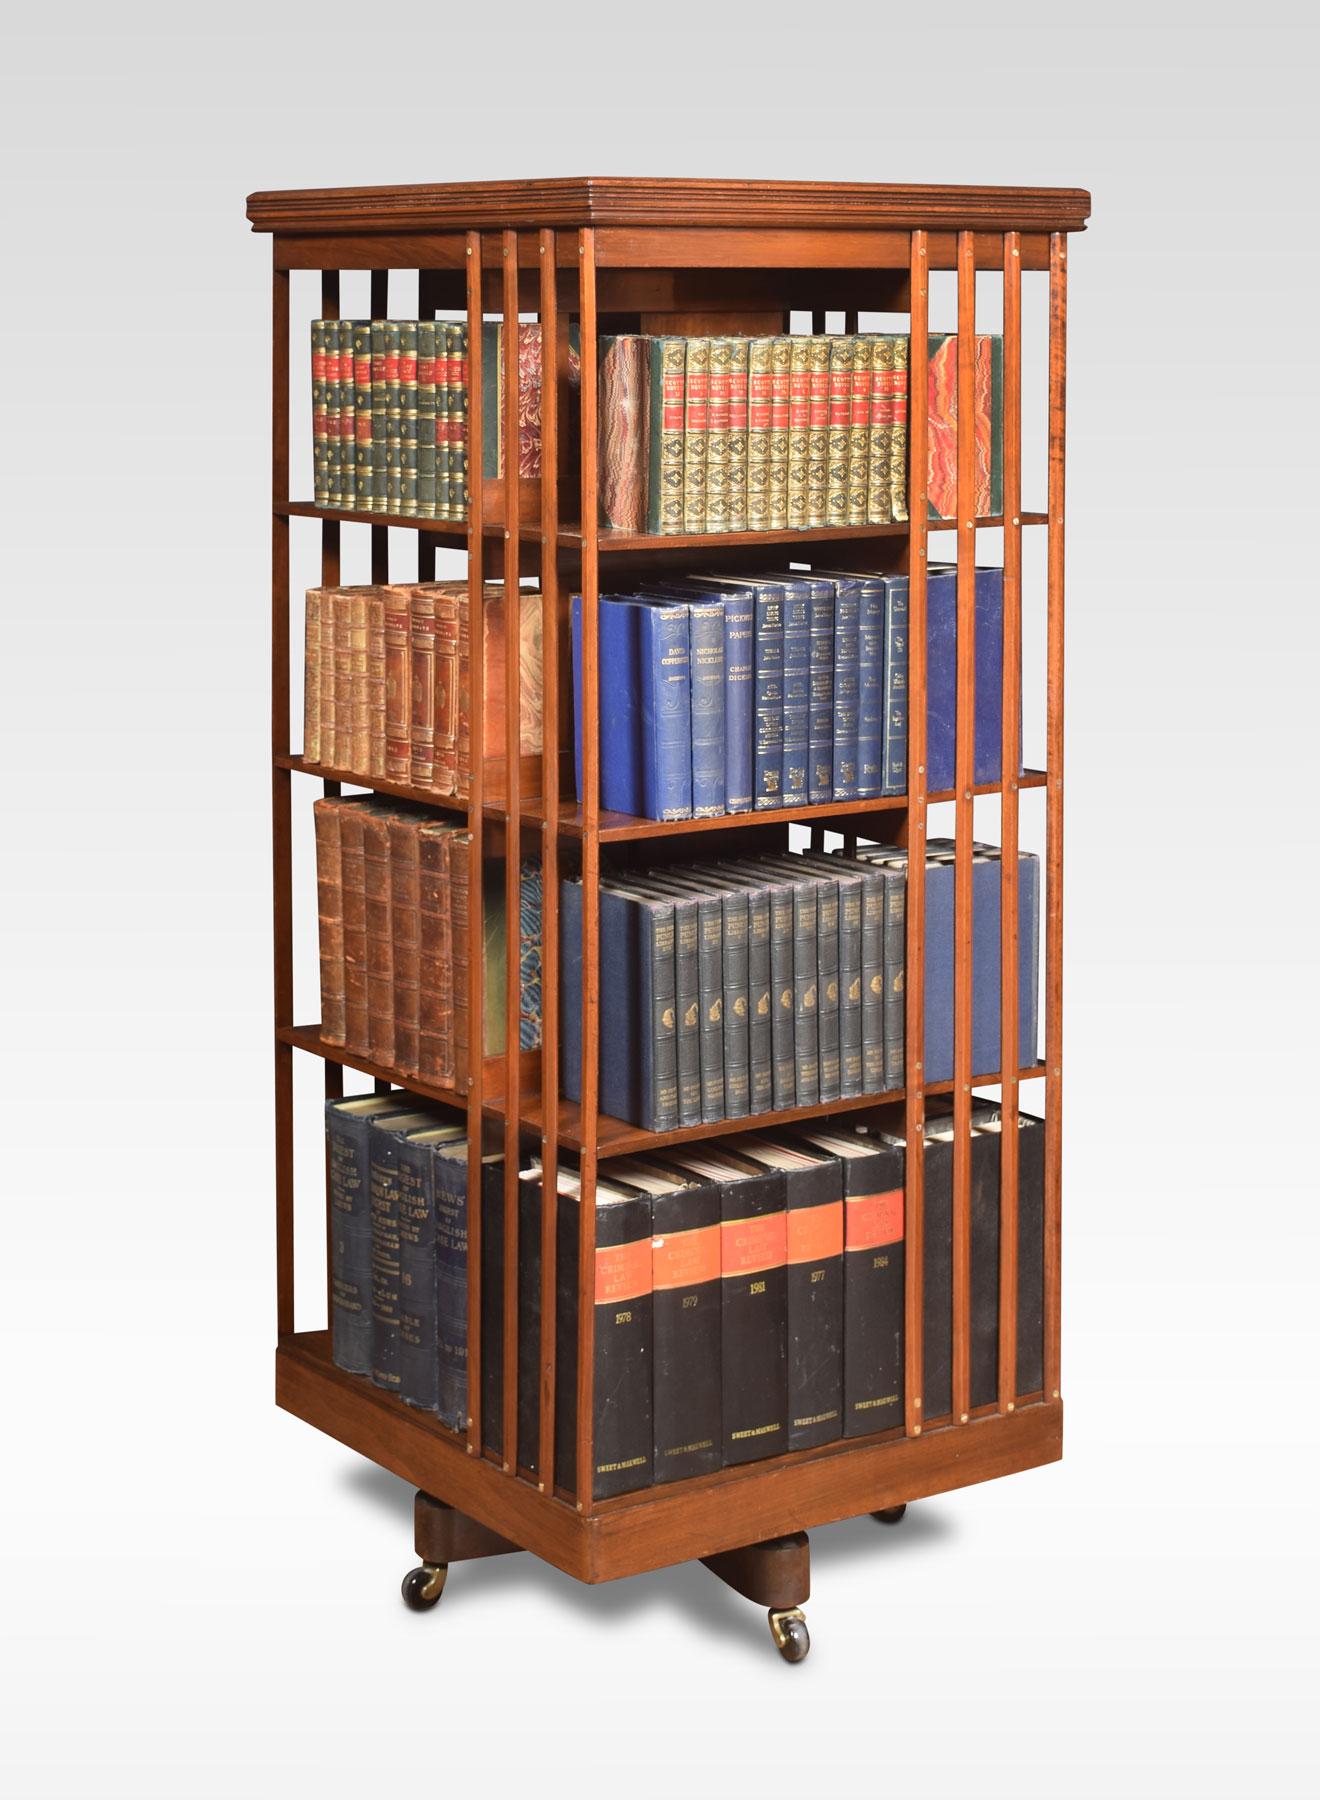 Large walnut revolving bookcase the square moulded top above four tiers with an arrangement of shelves raised up on metal cruciform base terminating in ceramic castors.
Dimensions
Height 53.5 inches
Length 23.5 inches
Width 23.5 inches.